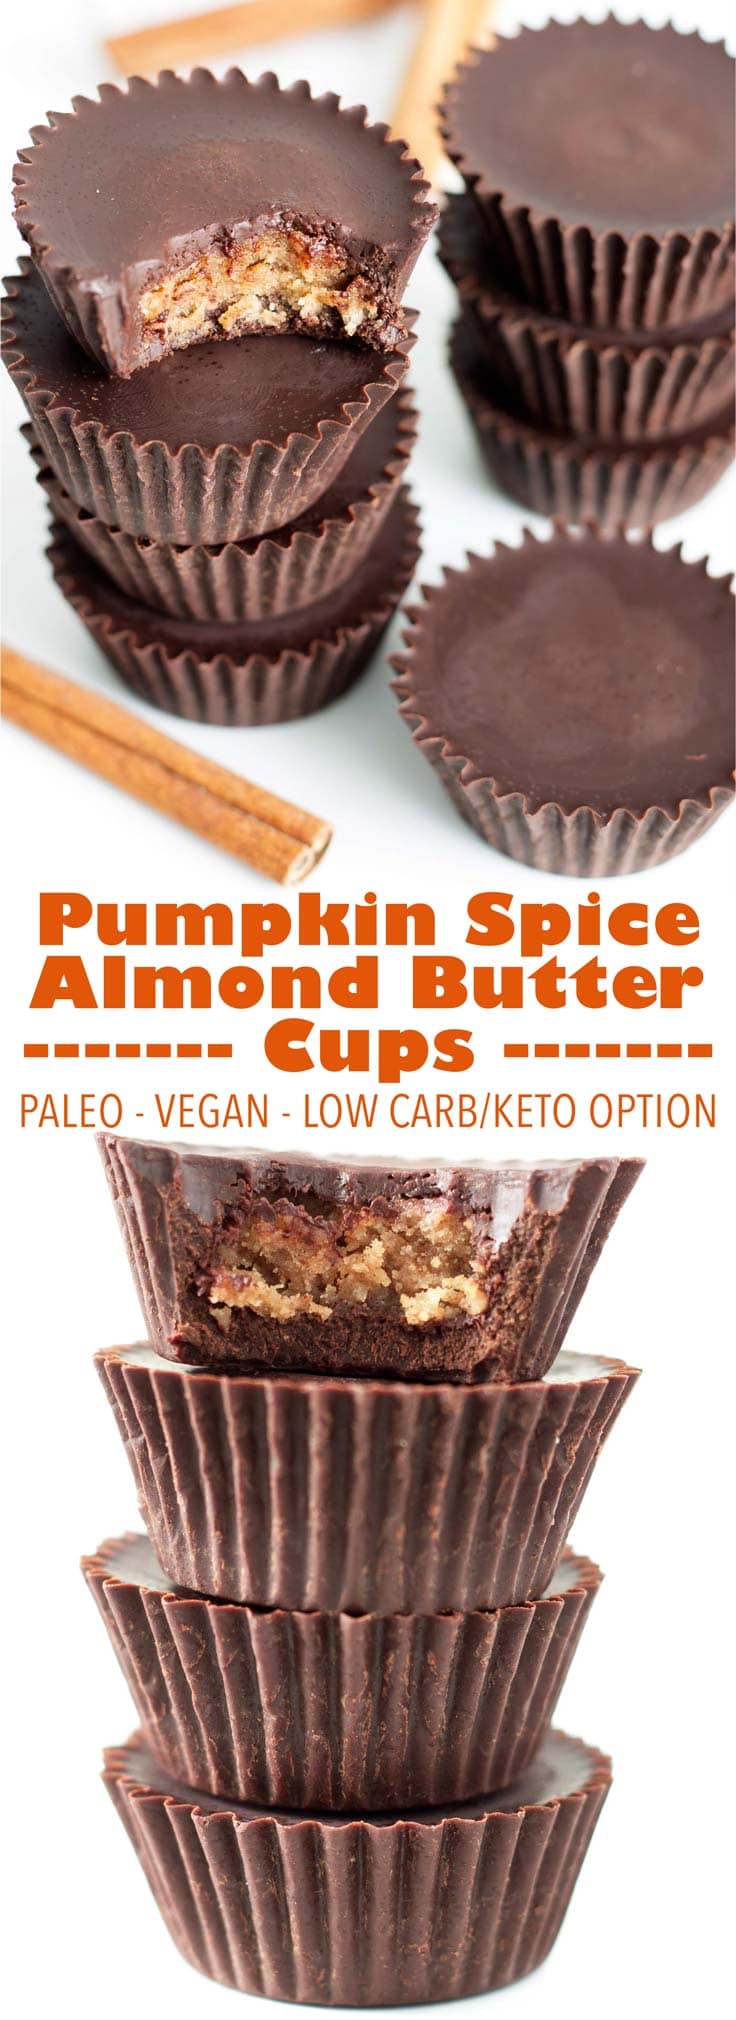 Reese's cups made healthy and spiked with pumpkin pie flavor! This fun fall recipe is easy to make, paleo, dairy free, and can be made low carb and keto!